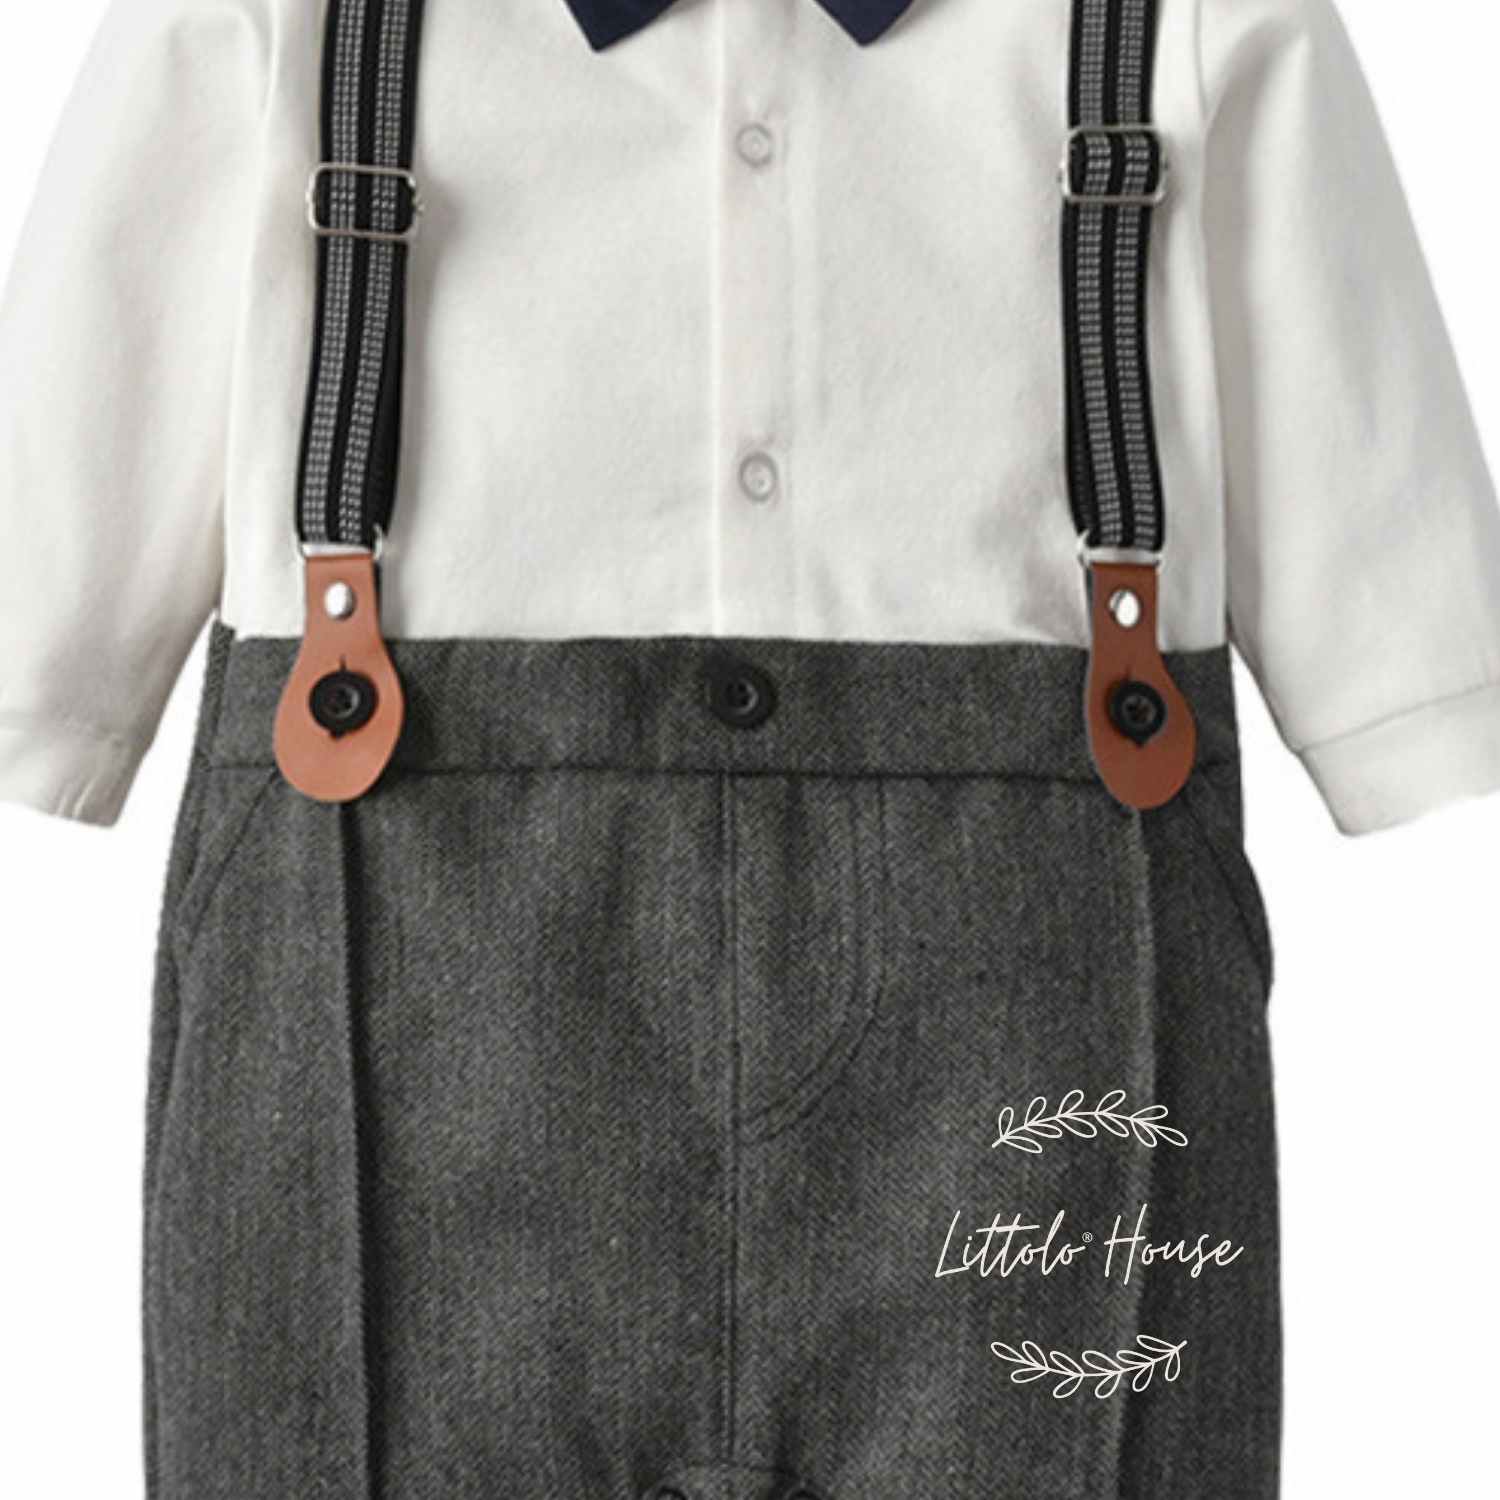 https://littolo.house/wp-content/uploads/2022/08/Baby-Boy-Suit-Romper-with-Cap-and-Bow-Tie-Outfit-O044-_-15M-_-White-Grey.jpg